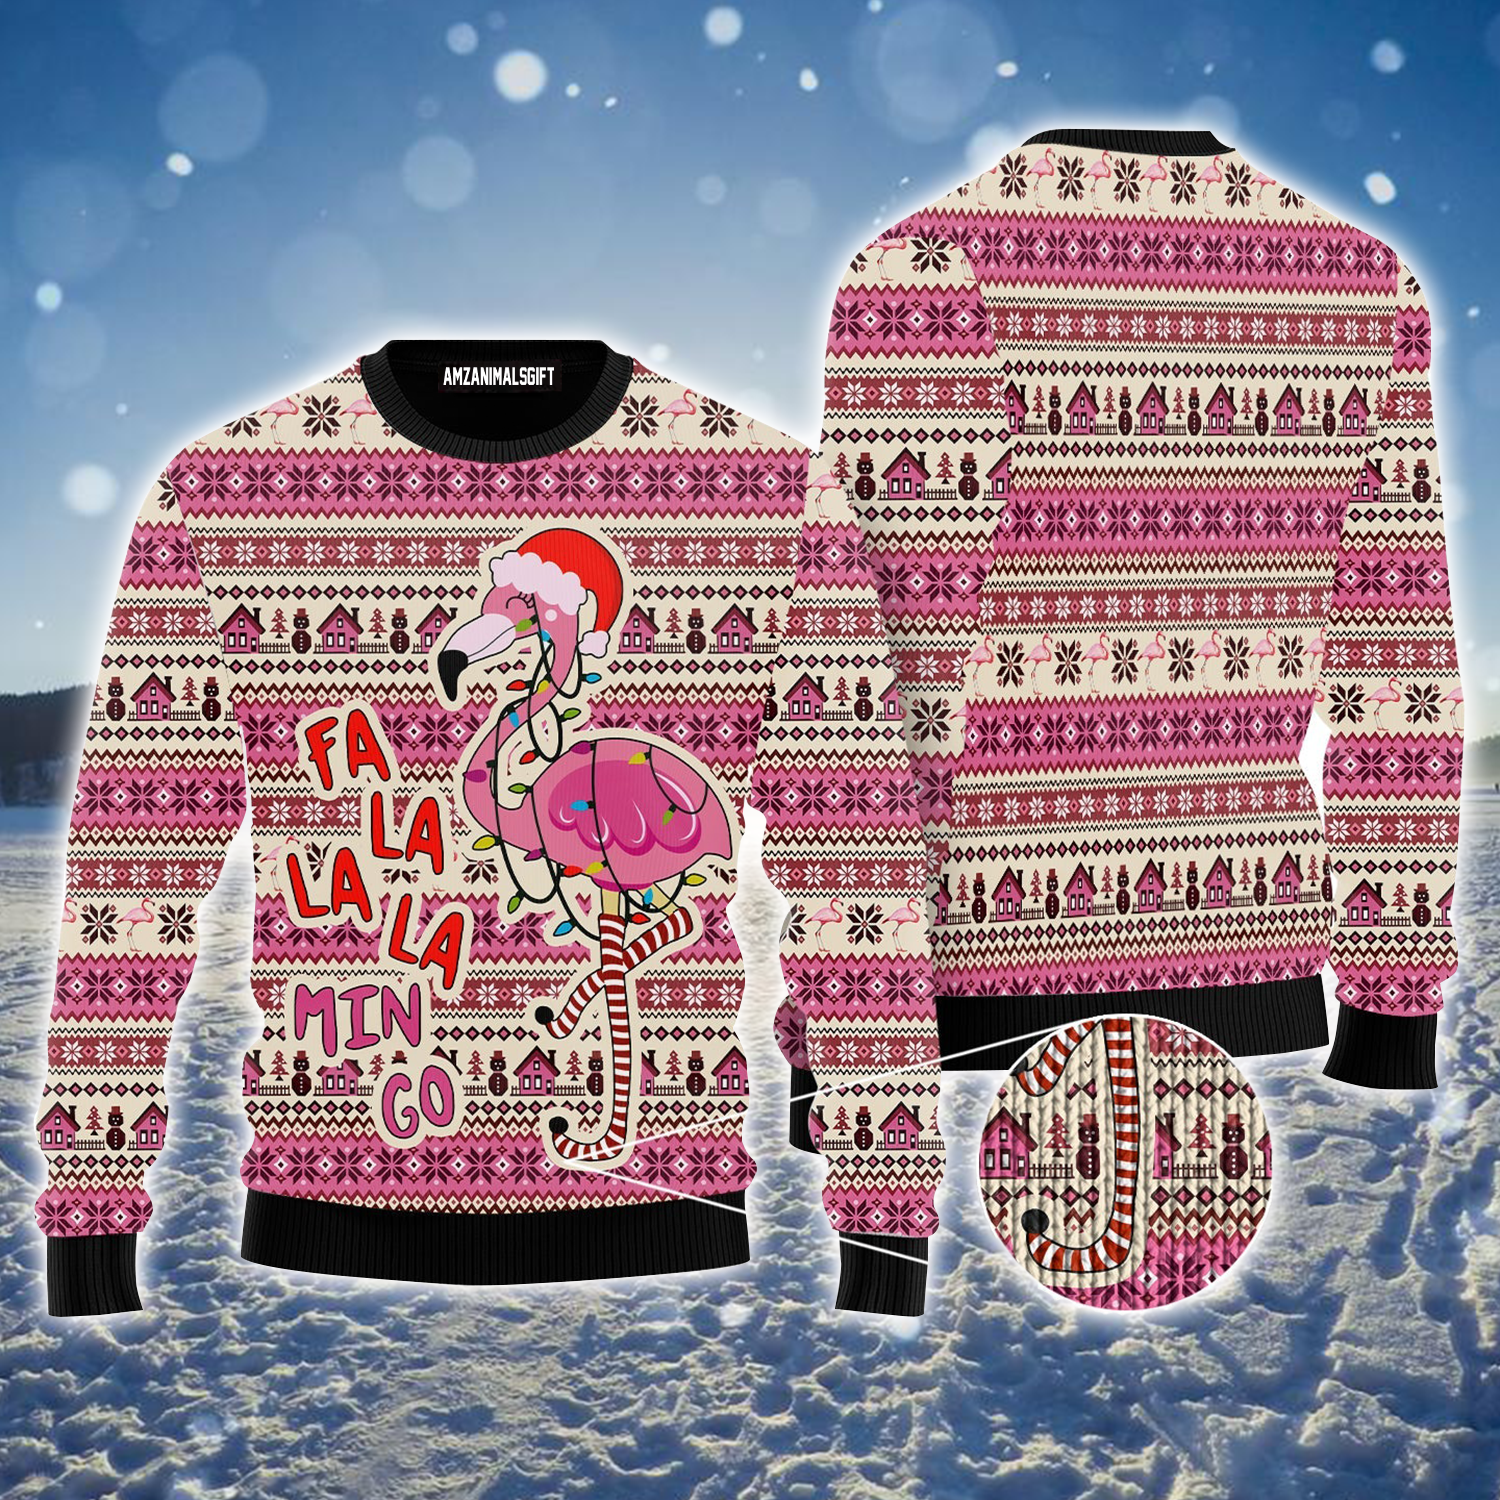 Flamingo Ugly Sweater, Funny Falalamingo Christmas Ugly Sweater For Men & Women, Perfect Gift For Christmas, Friends, Family